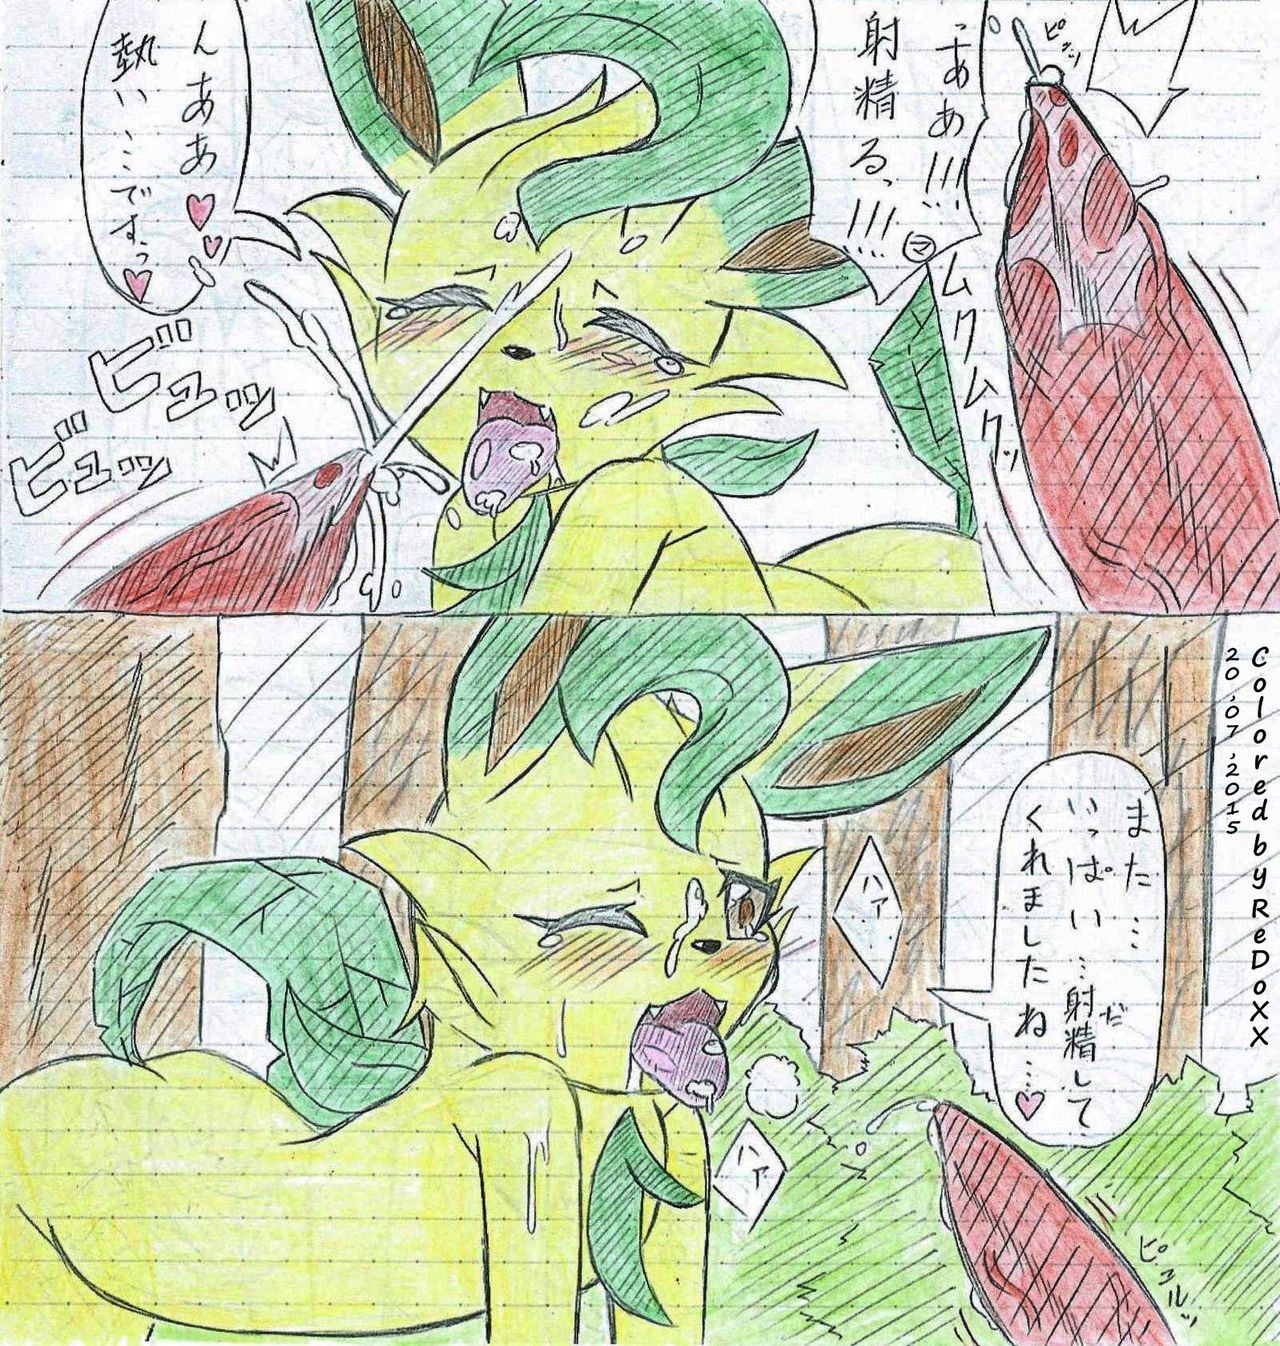 Leafeon X Quilava [Colorized by ReDoXX] 30